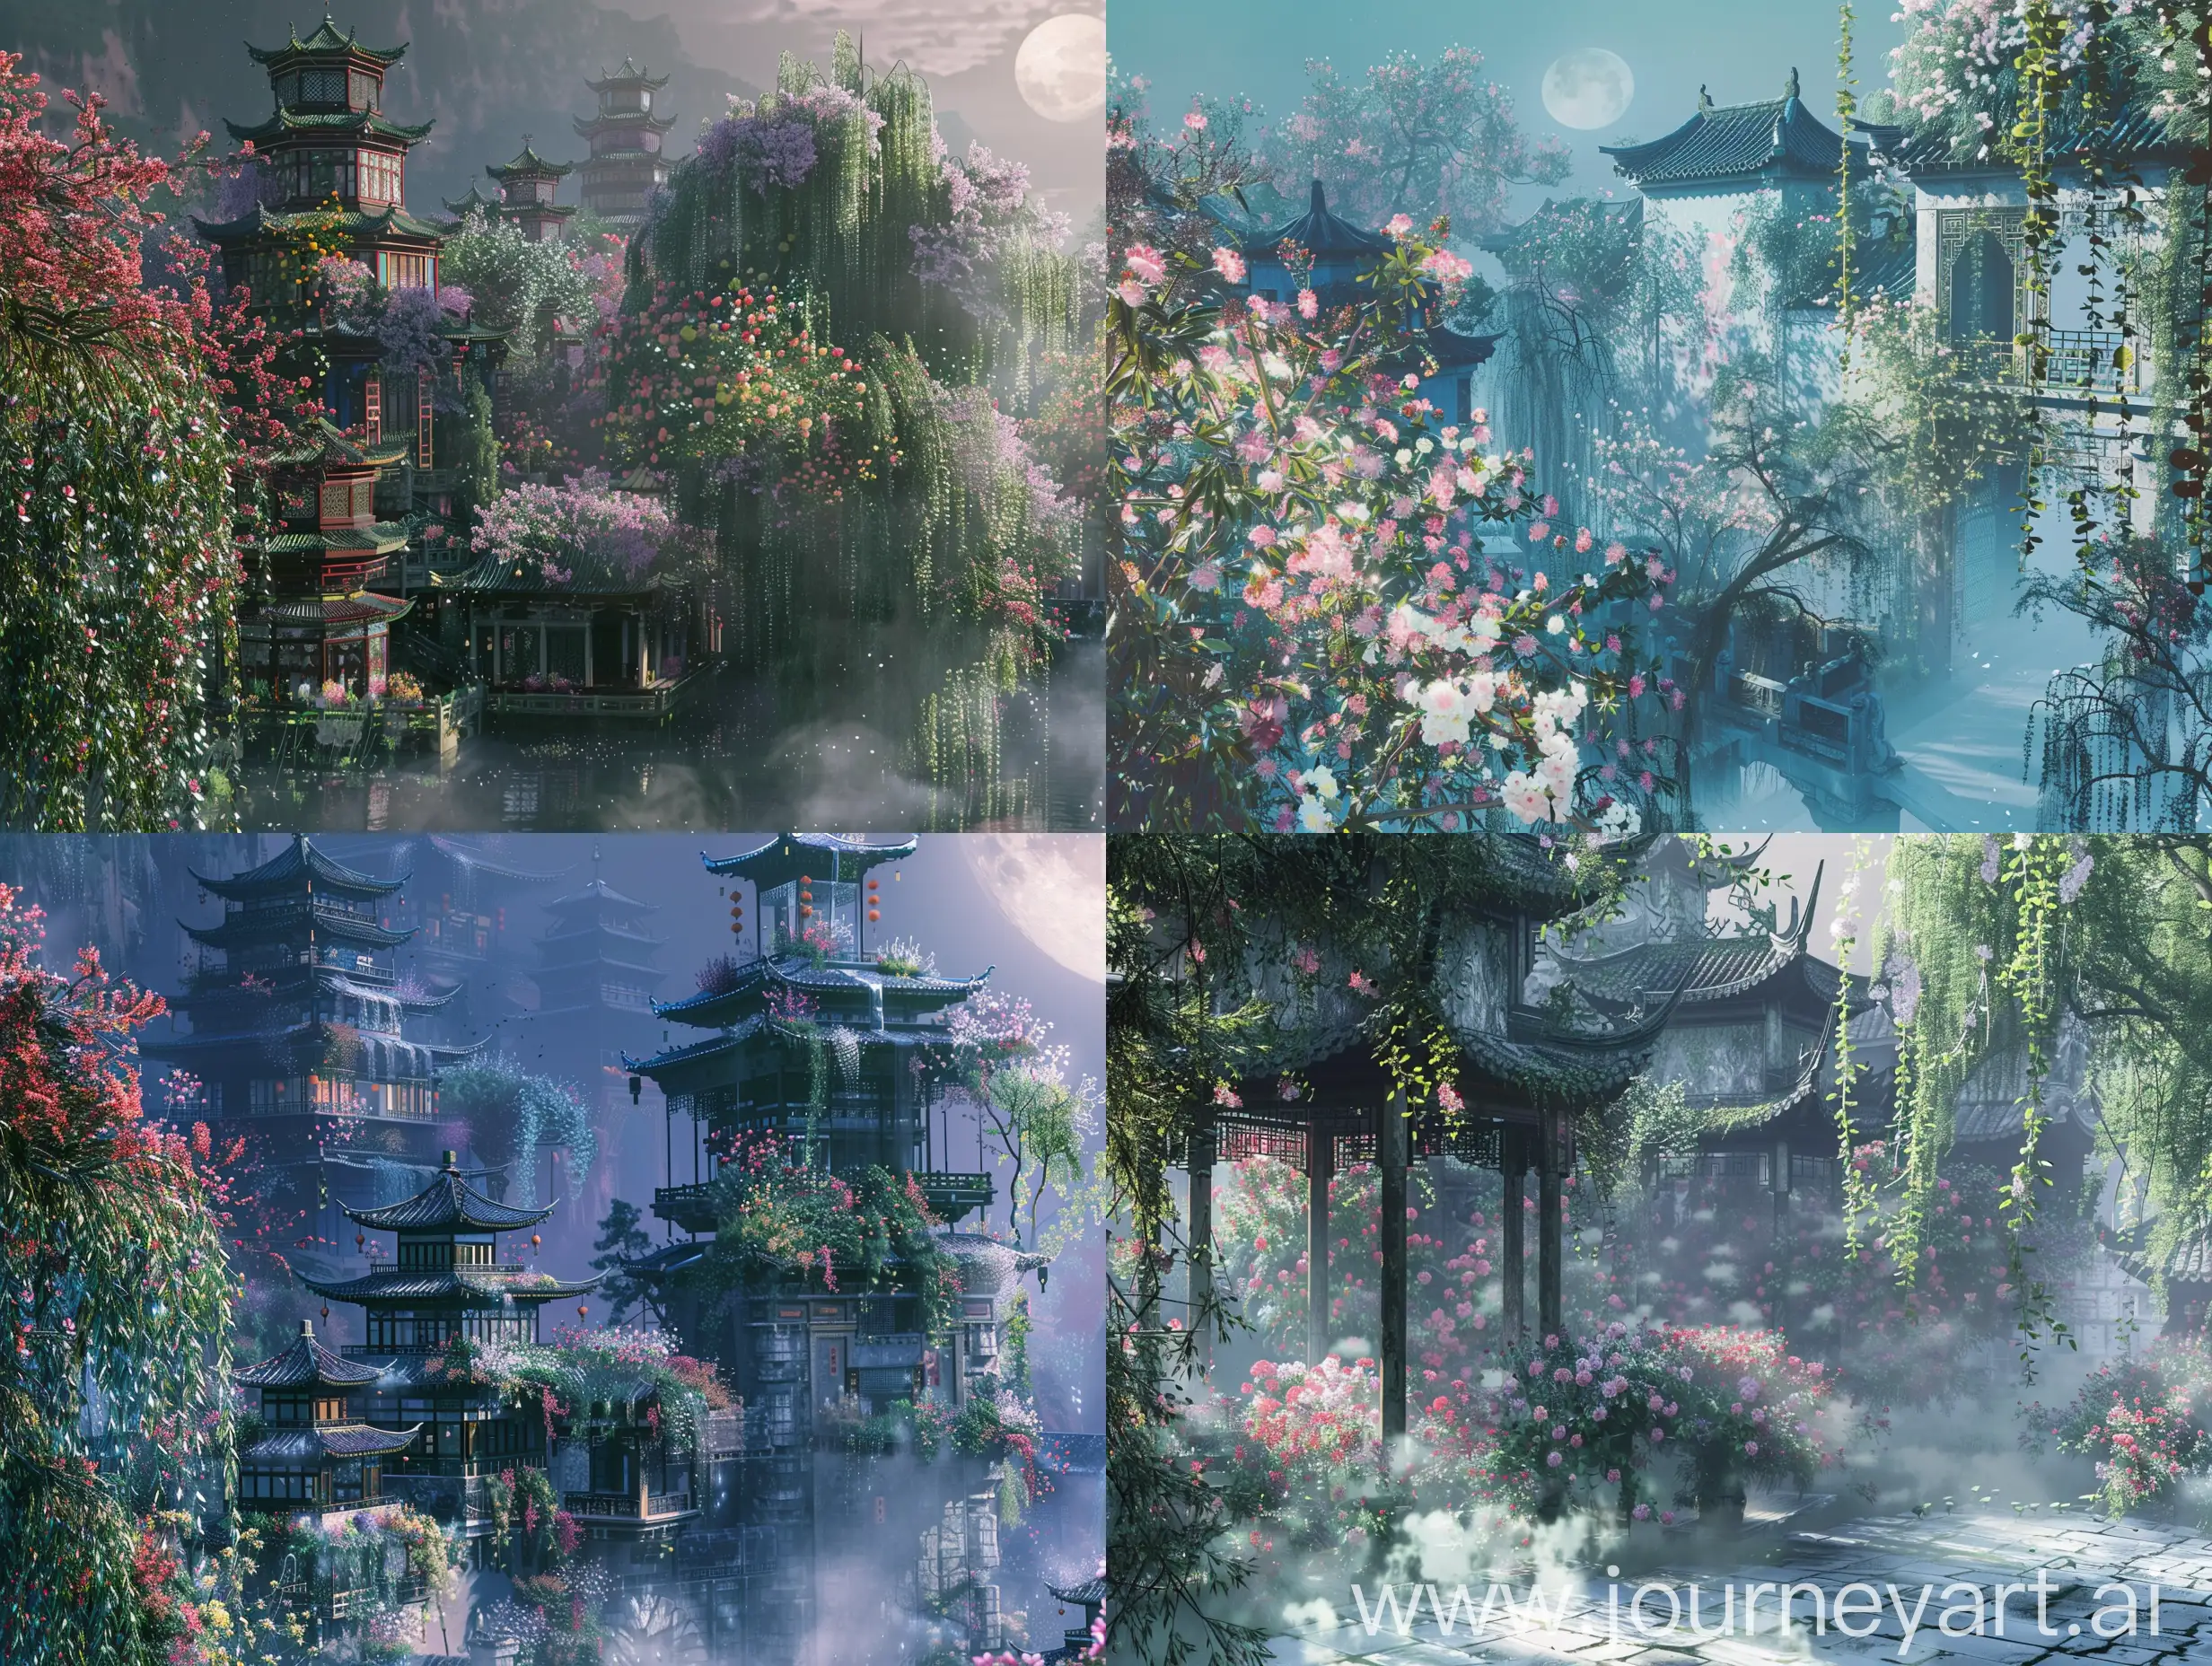 A blossoming garden scene from ancient China, with layers of buildings shrouded in flowers, and delicate spring shadows cast by the weeping willows in a soft moonlight, displaying a sense of richness and vibrancy that spring brings.